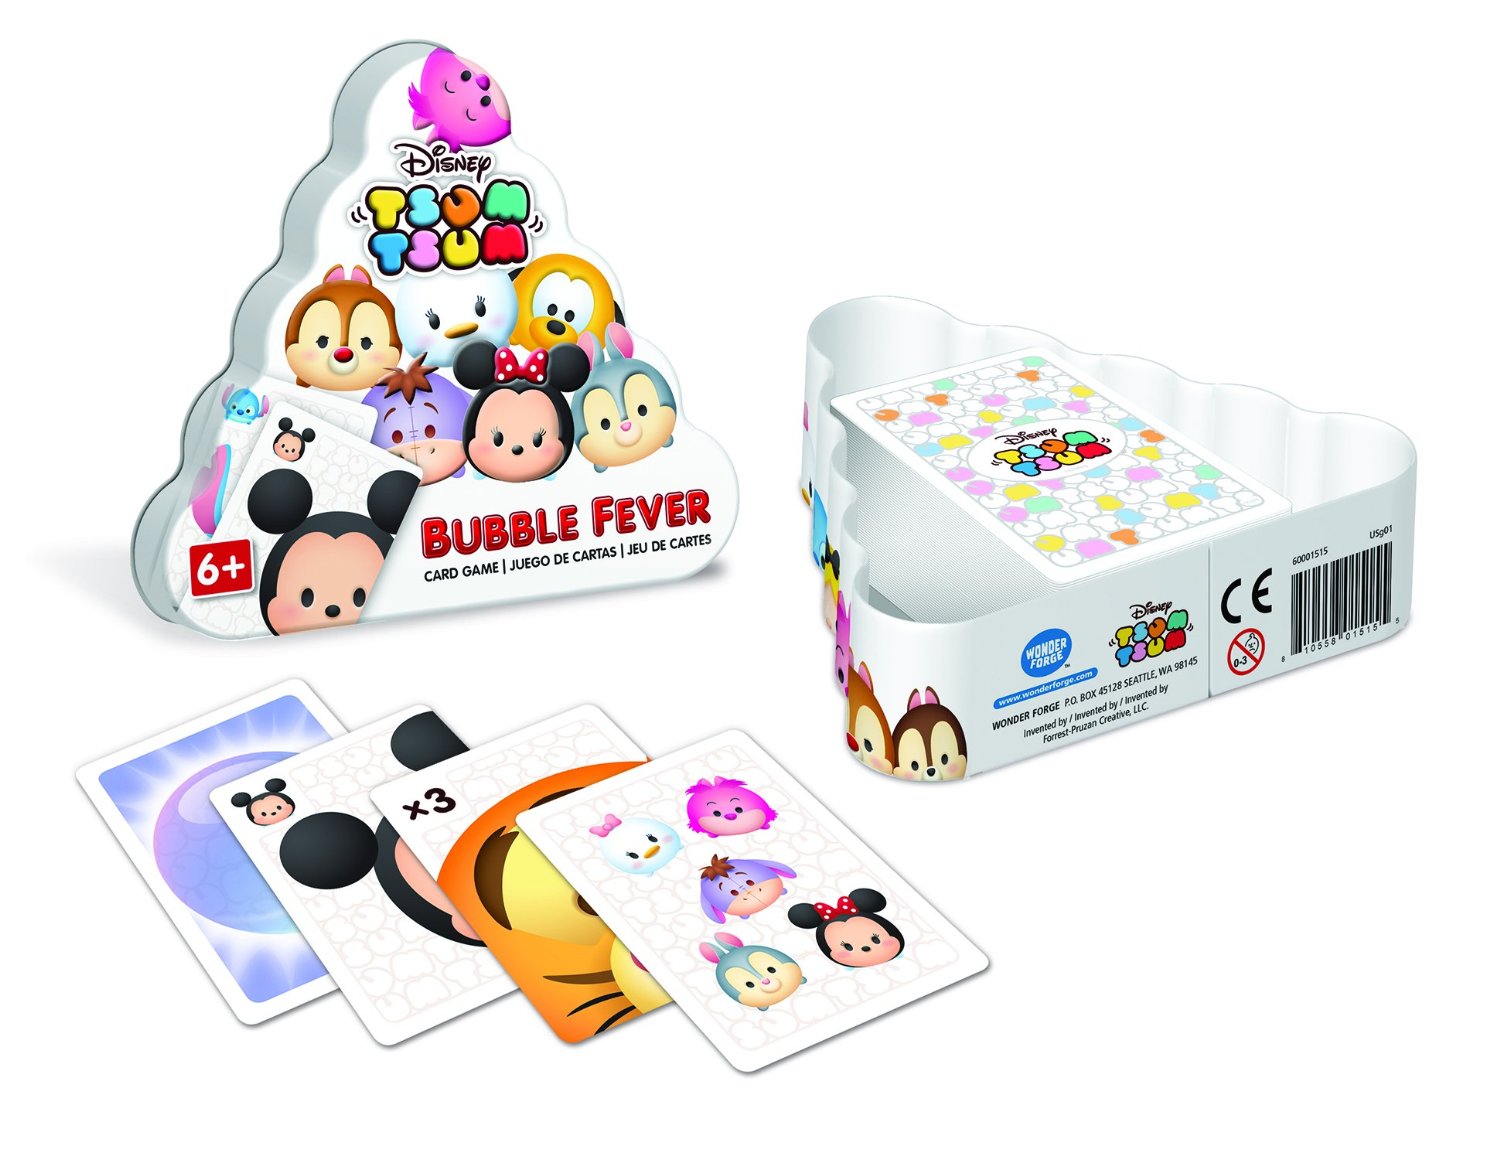 POP Up the Fun with the Tsum Tsum Bubble Fever Card Game